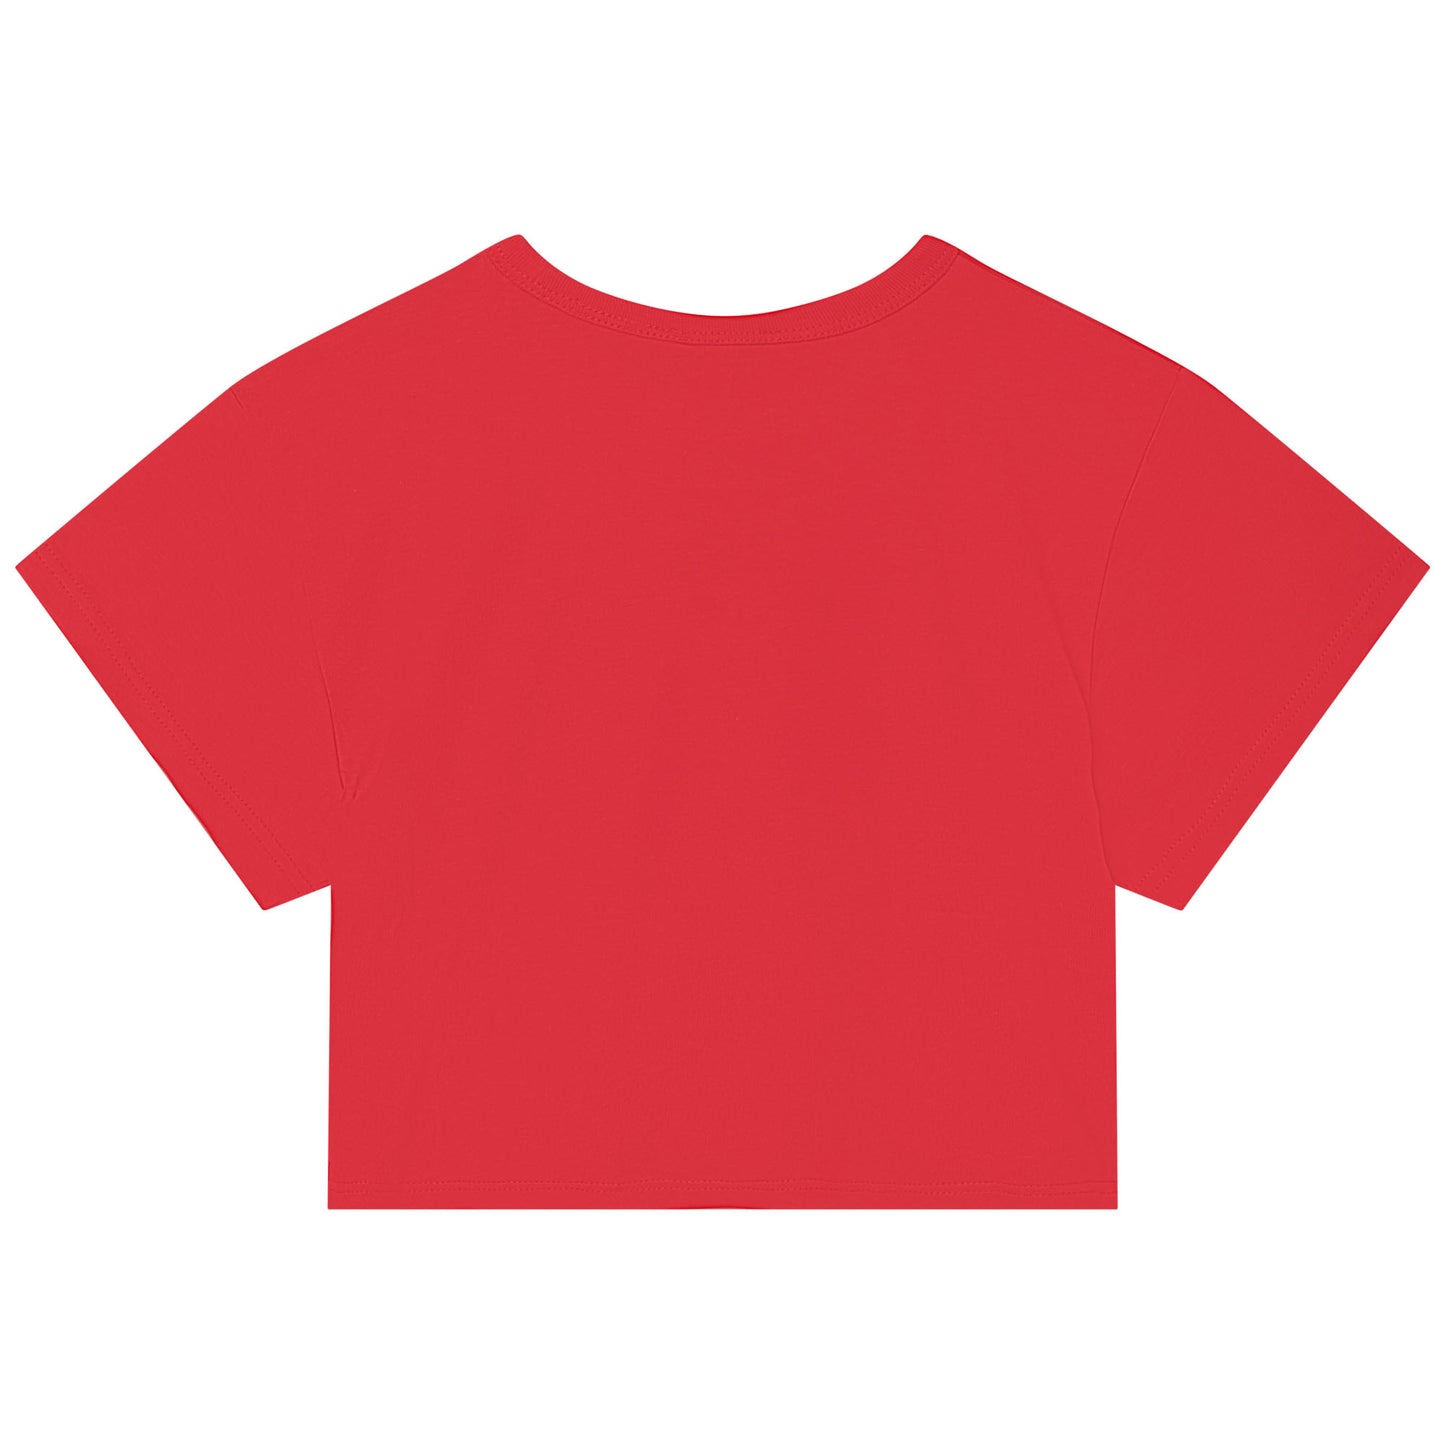 Marc Jacobs Girl's Red Printed Cotton T-Shirt